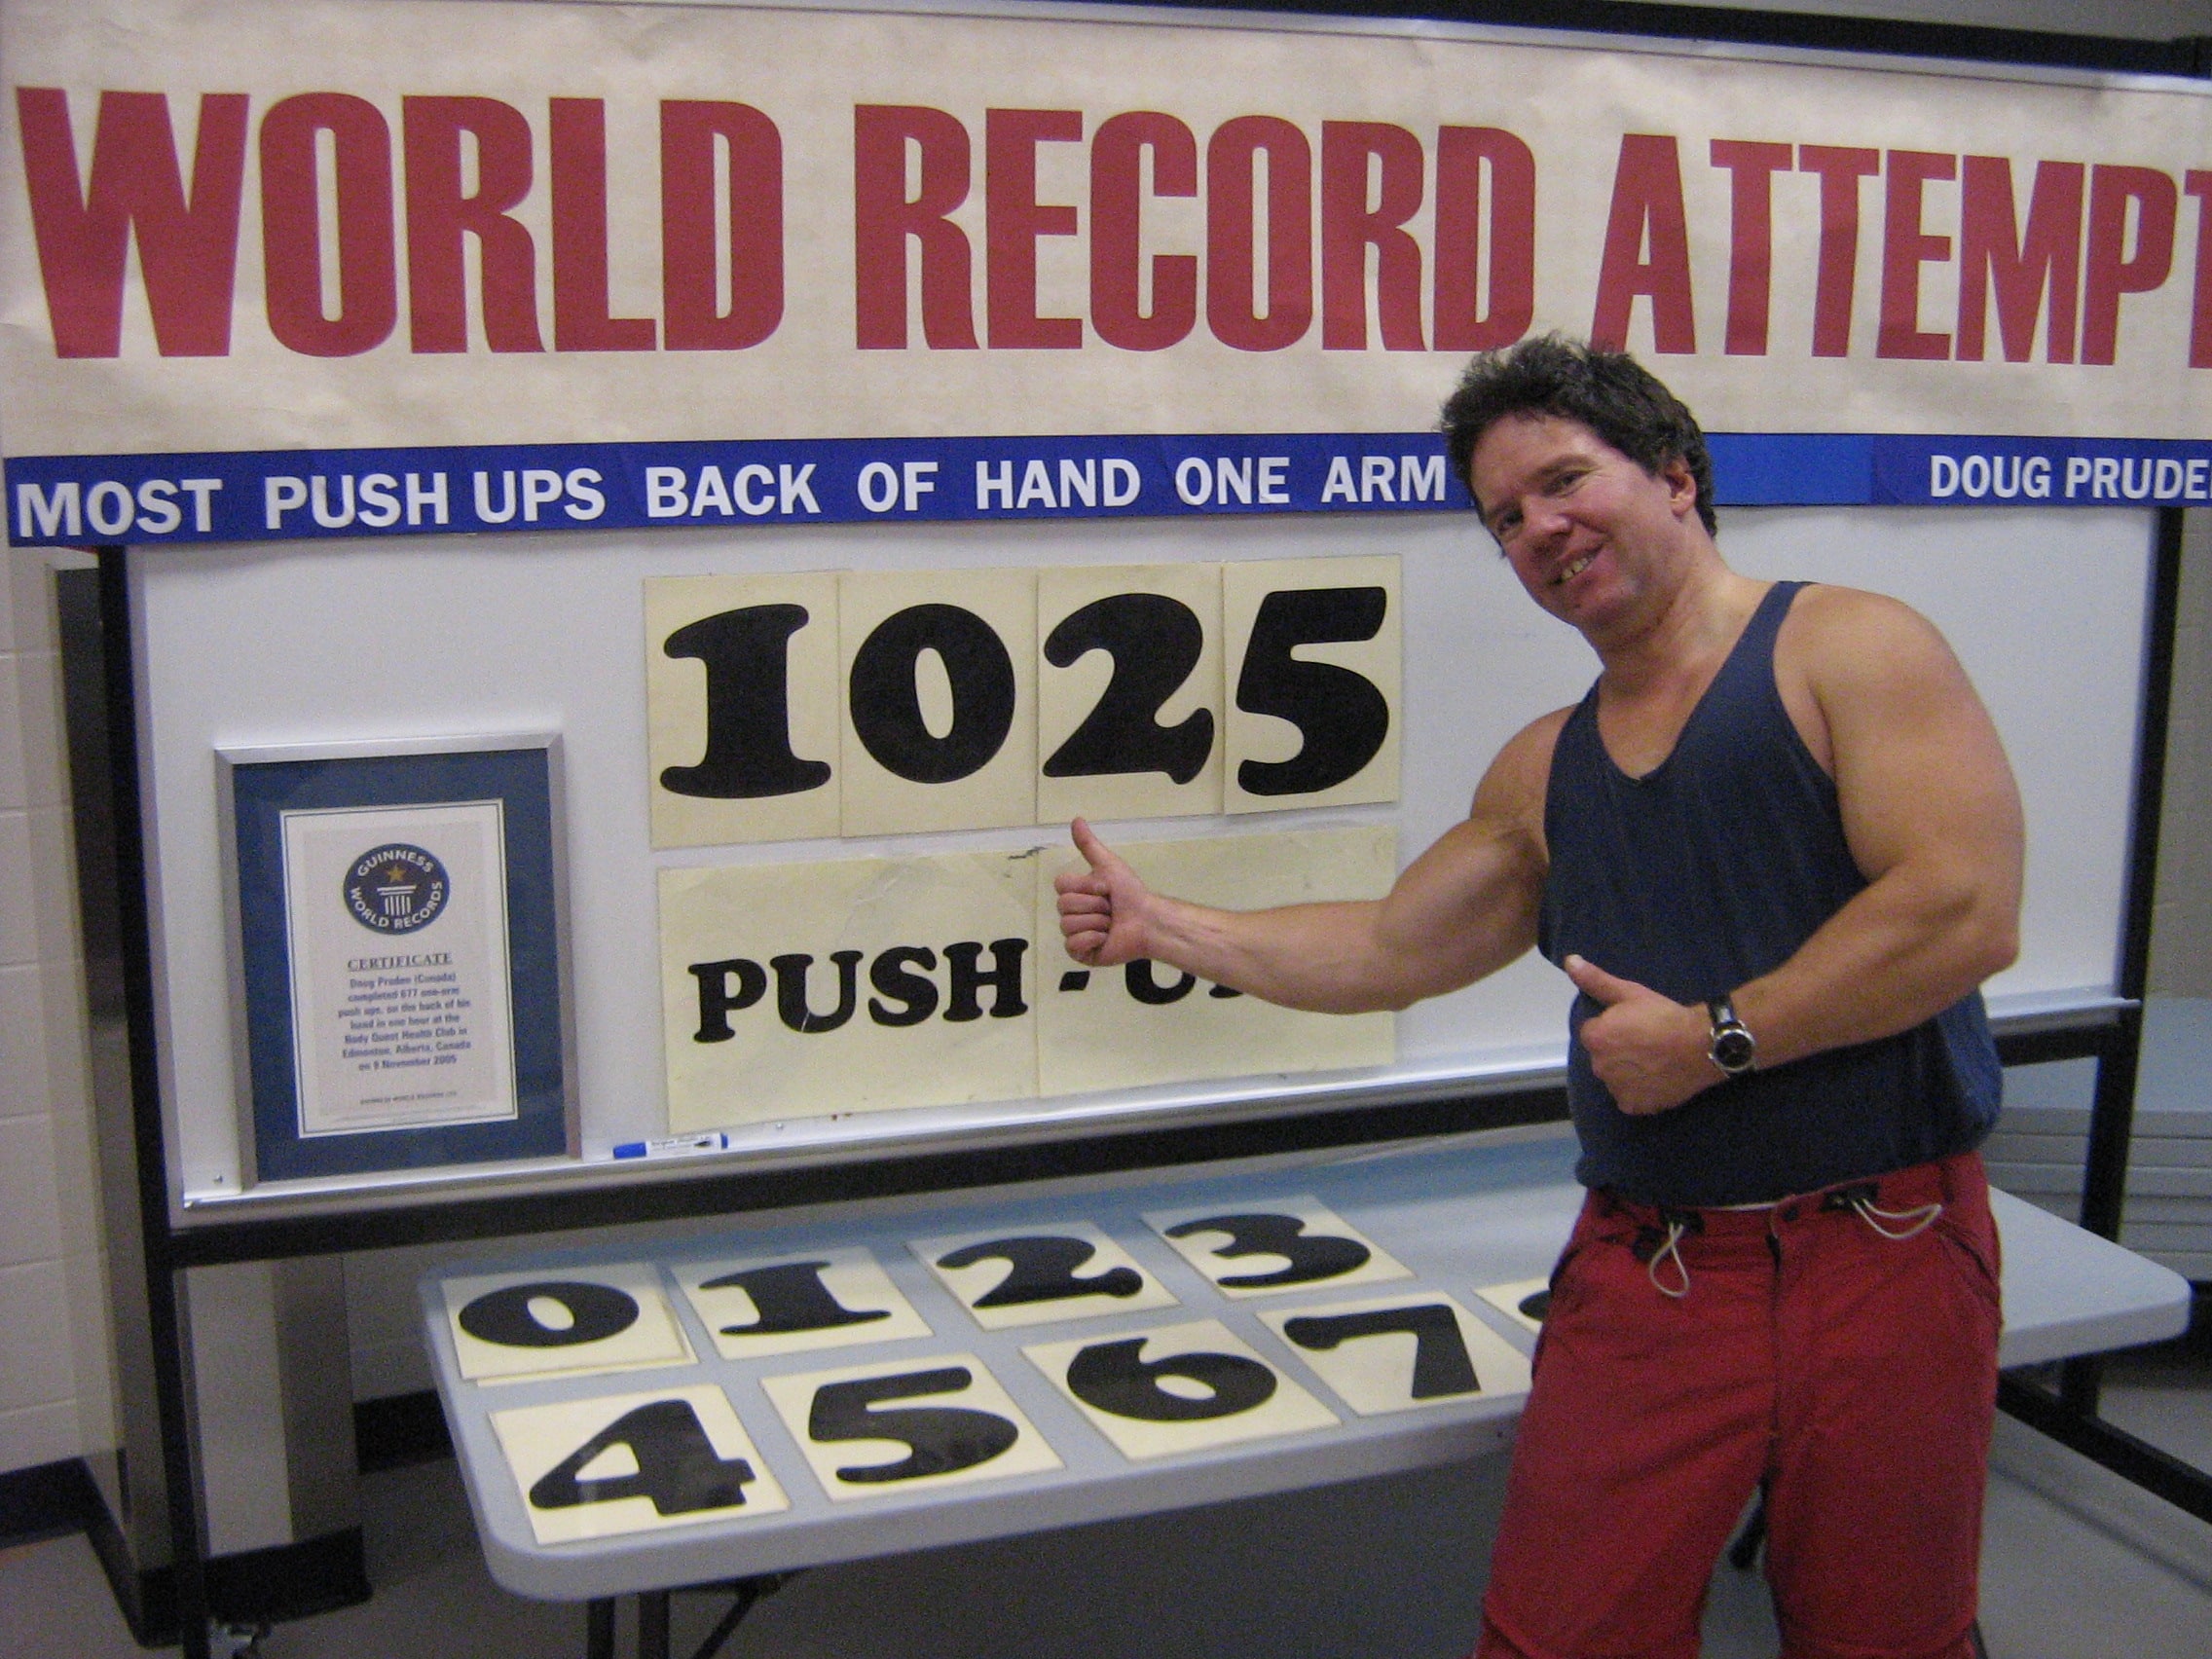 Aussie breaks world record with 3,206 push-ups in an hour